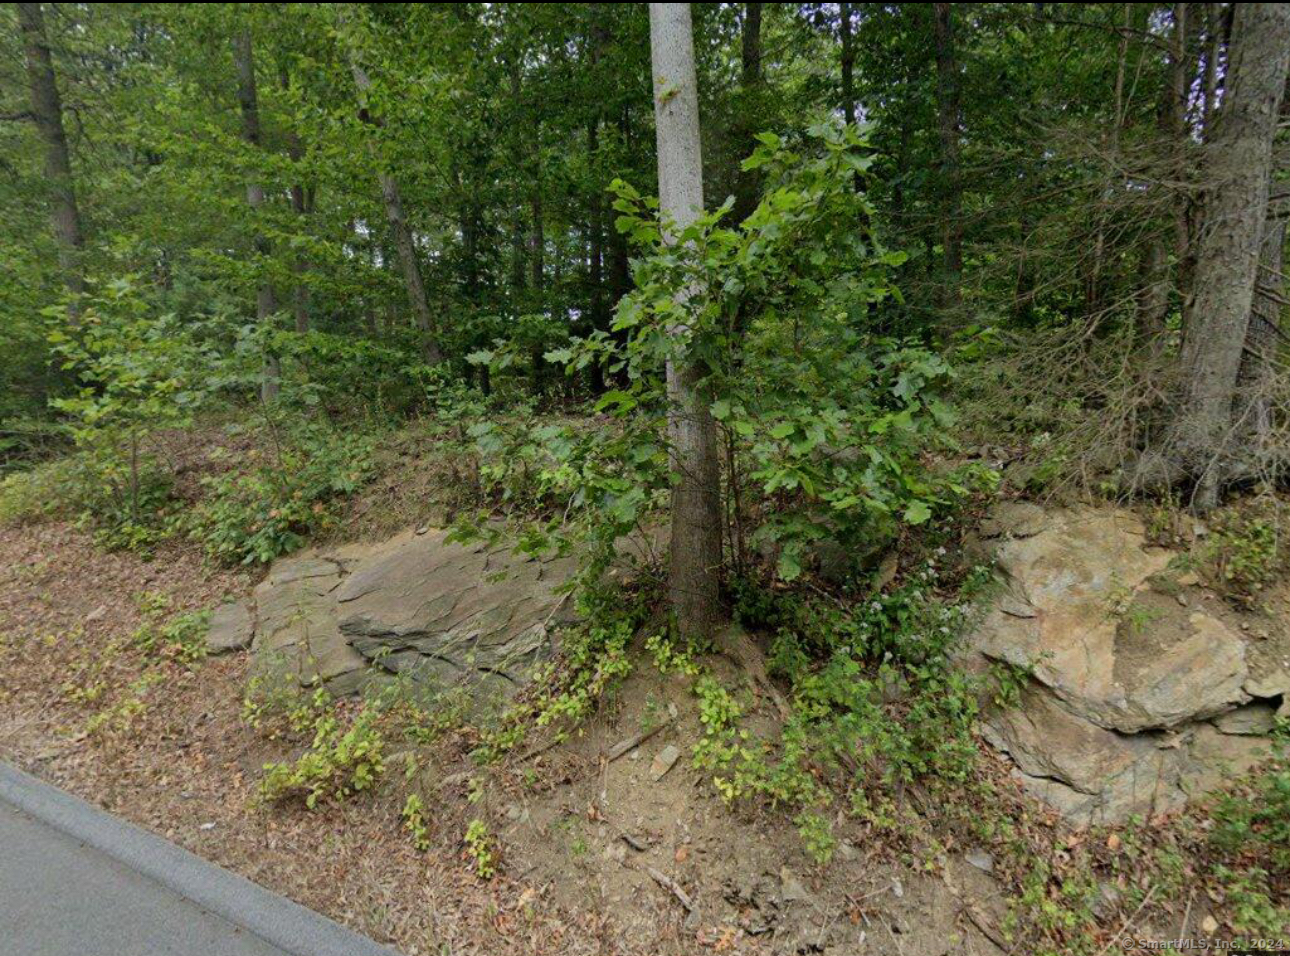 In The Hills of Lichfield County! Fantastic Opportunity to Build Your Dream Home w/ Lots of Privacy on this Wooded 9.27 Acres of Nature & Tranquility. Enjoy the Sounds of Transylvania Brook that Flows through this Property. Located in The Overbrook Subdivision of Woodbury. Woodbury named Most Charming Small Town by Reader's Digest! Near Roxbury Line and Scenic Route 67 and only 90 Minutes to NYC. Please Do Not Go to Property w/o Confirmed Appointment! Buyer to do their Own Due Diligence!